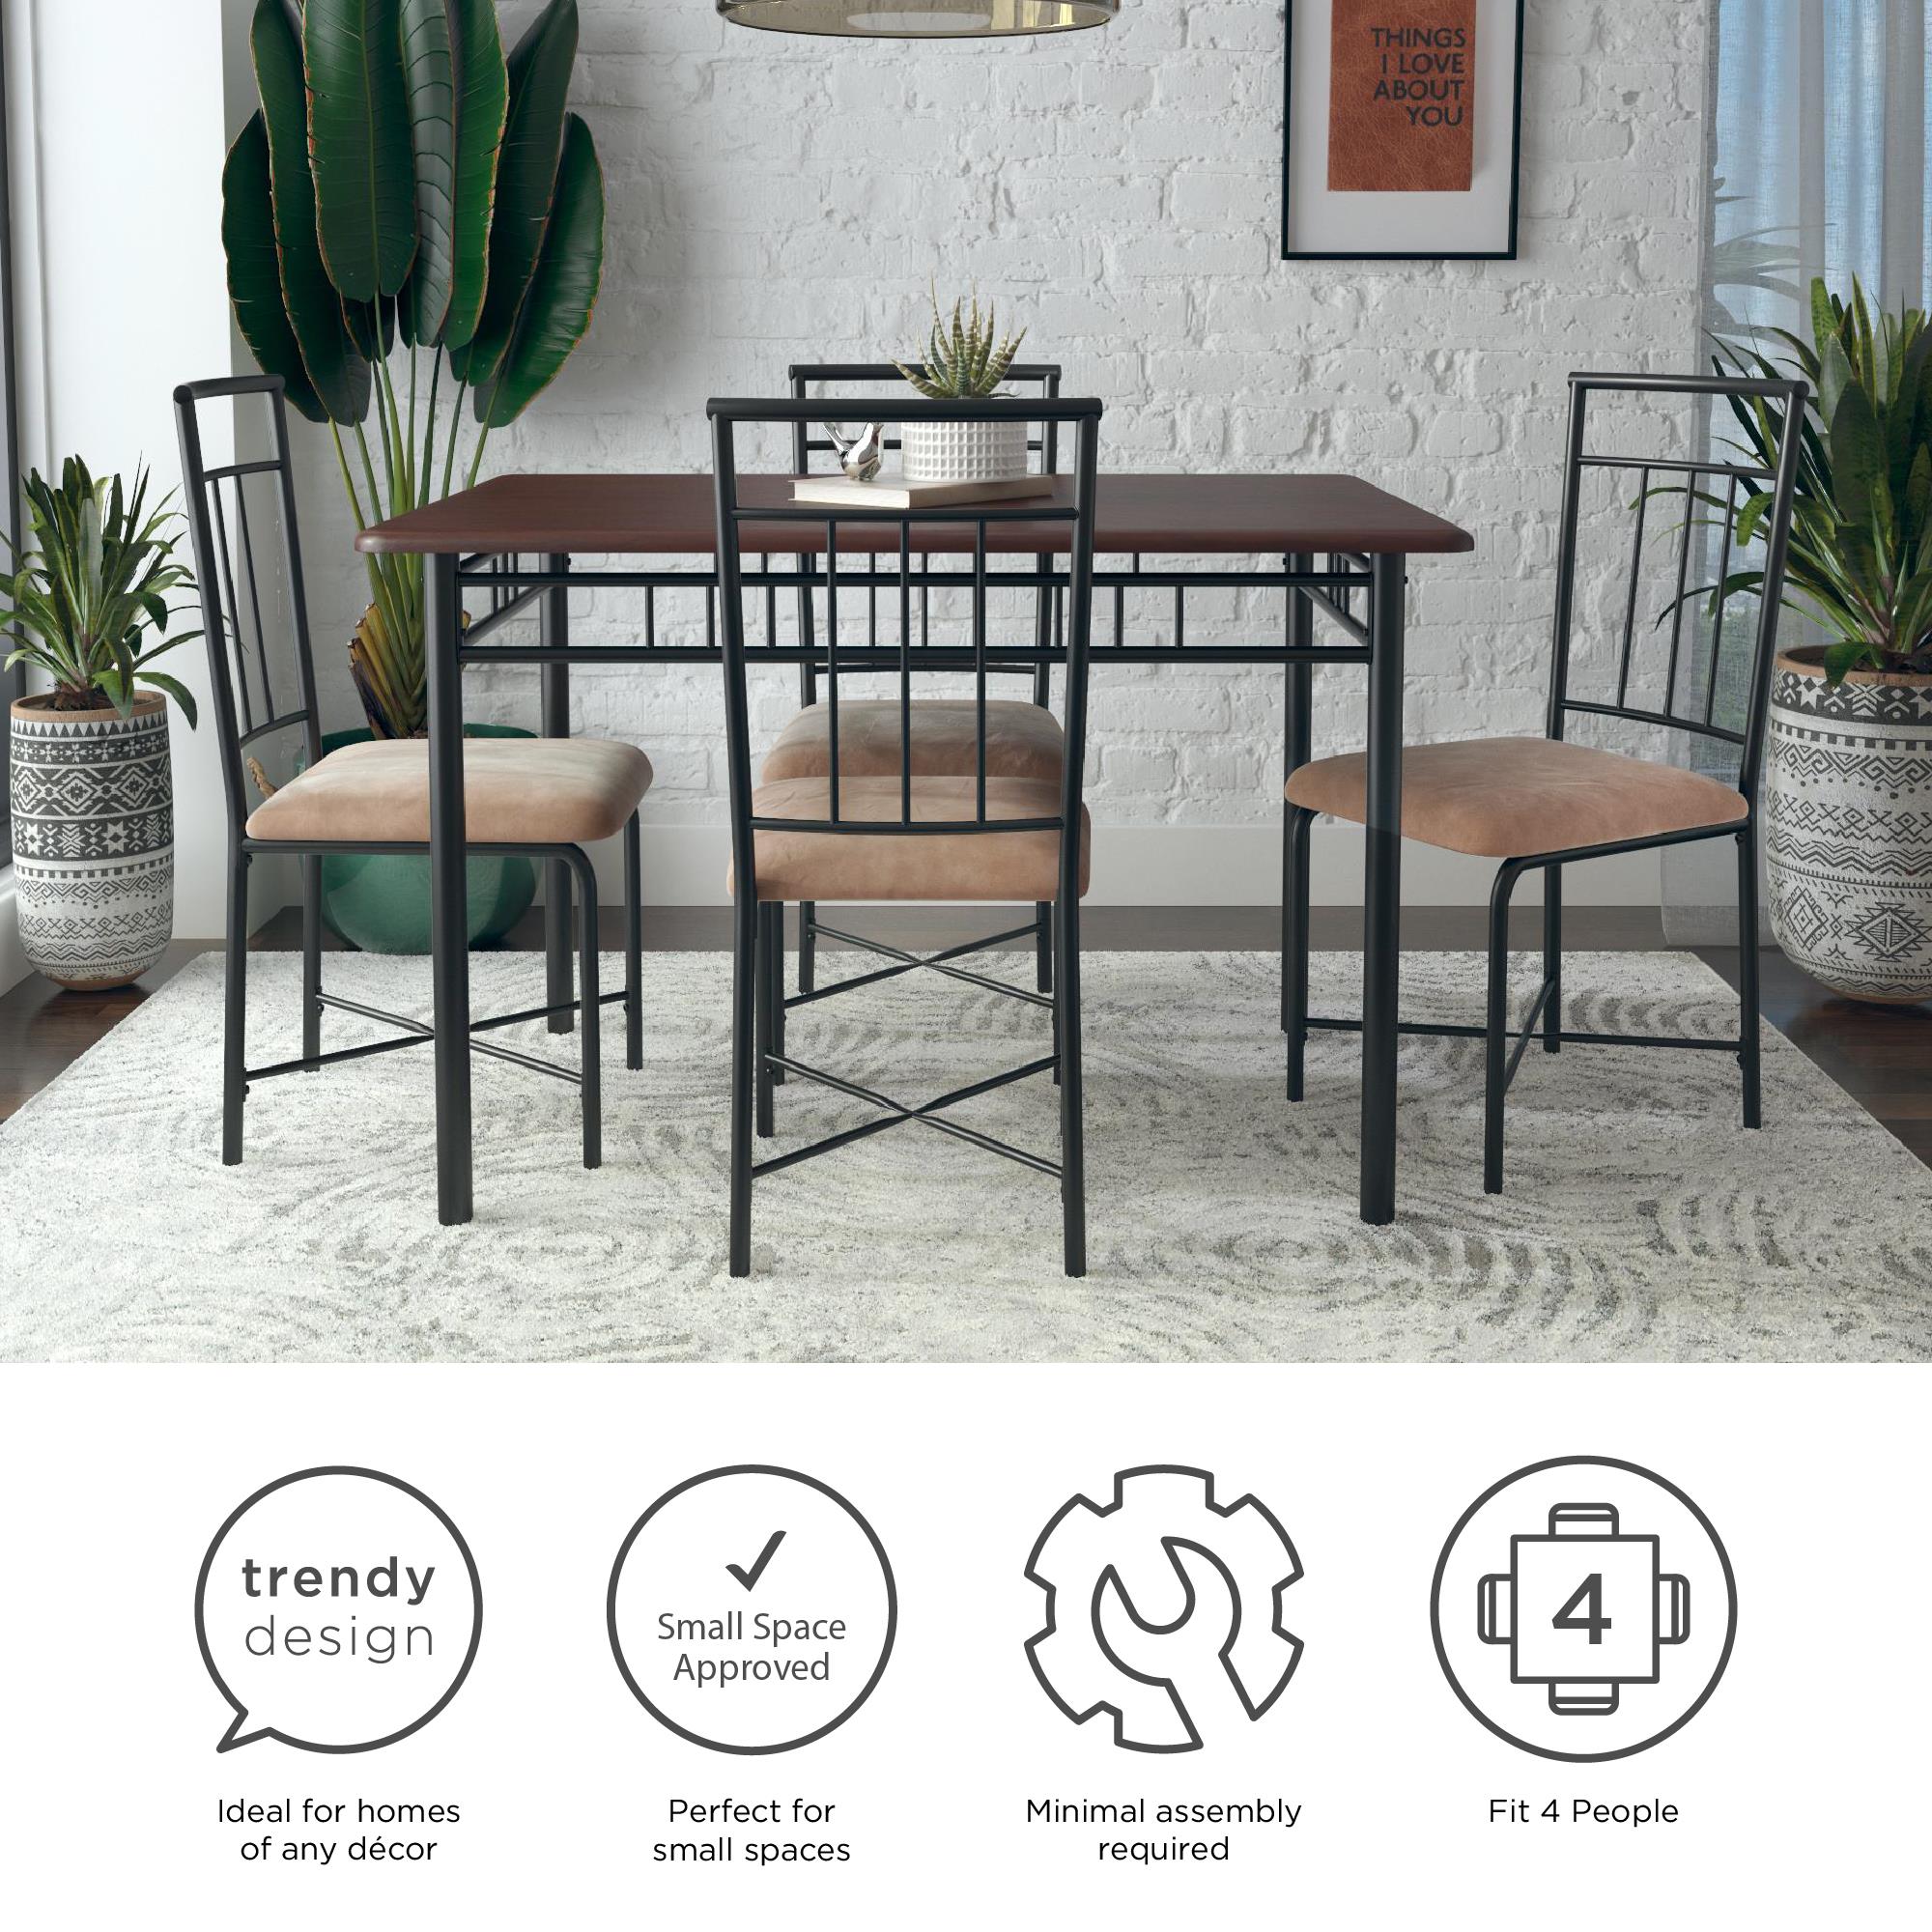 Mainstays Louise Traditional 5-Piece Wood & Metal Dining Set, Deep Walnut - image 20 of 22